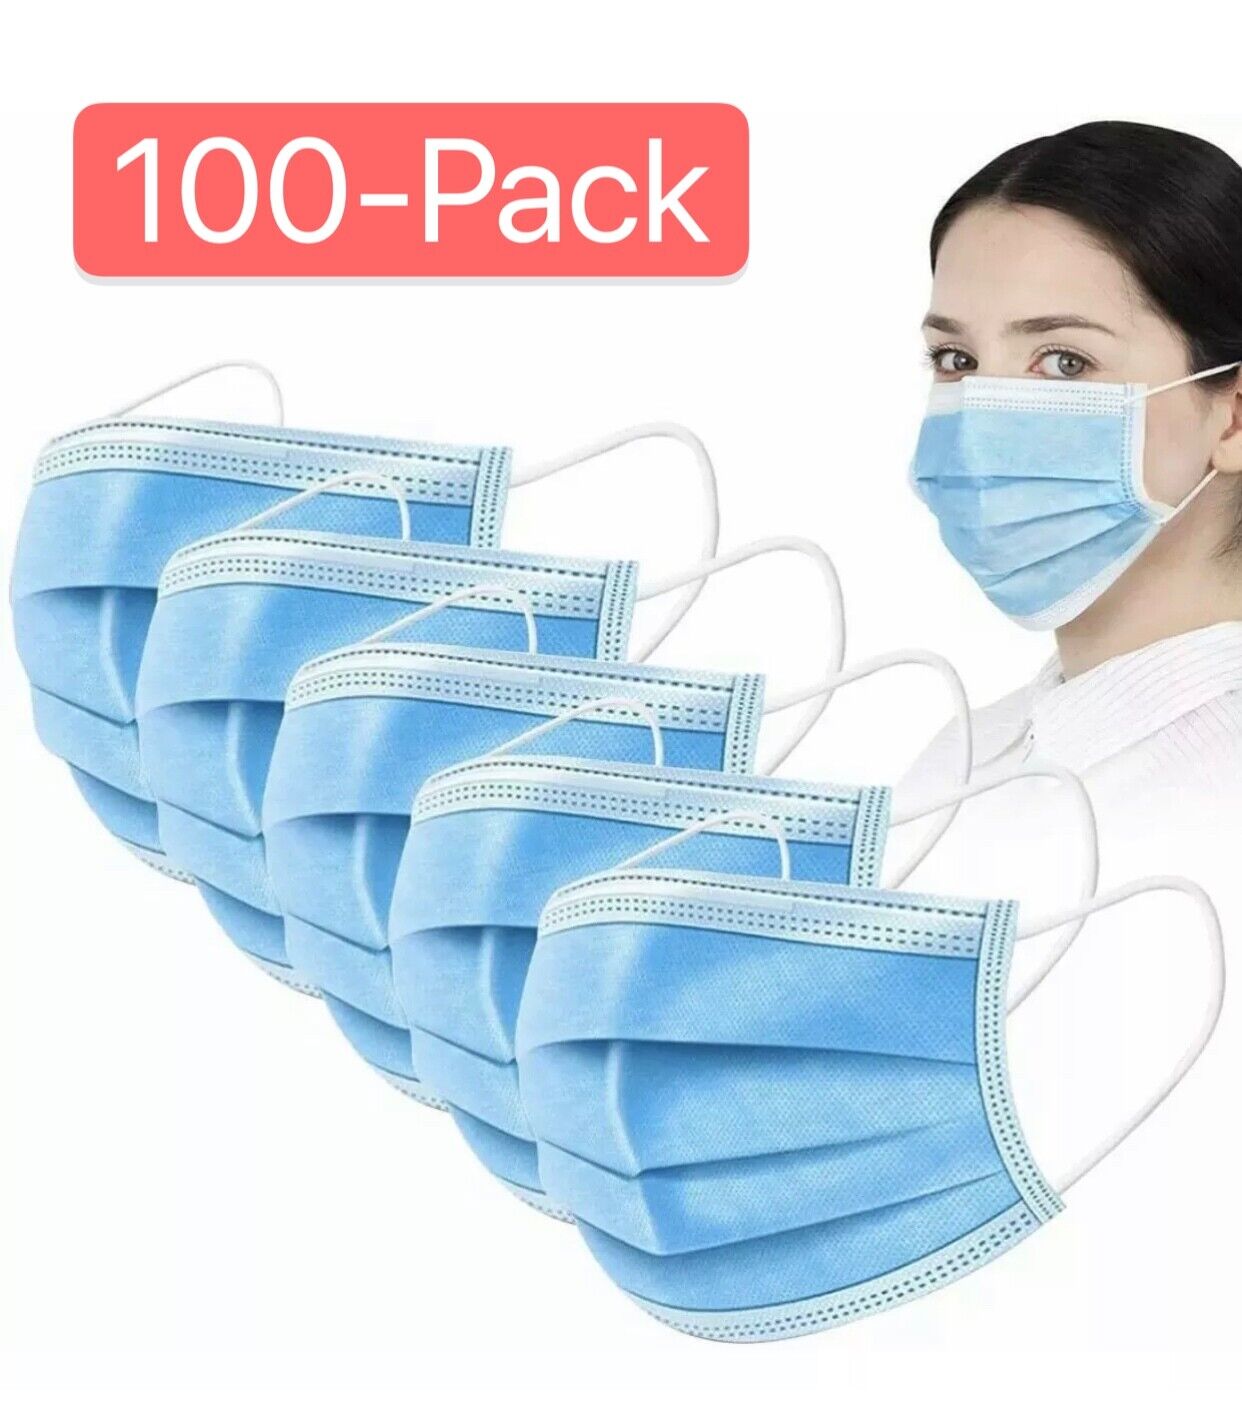  100 PCS Blue Face Mask Mouth & Nose Protecting Families Easy Safe Unbranded Does Not Apply